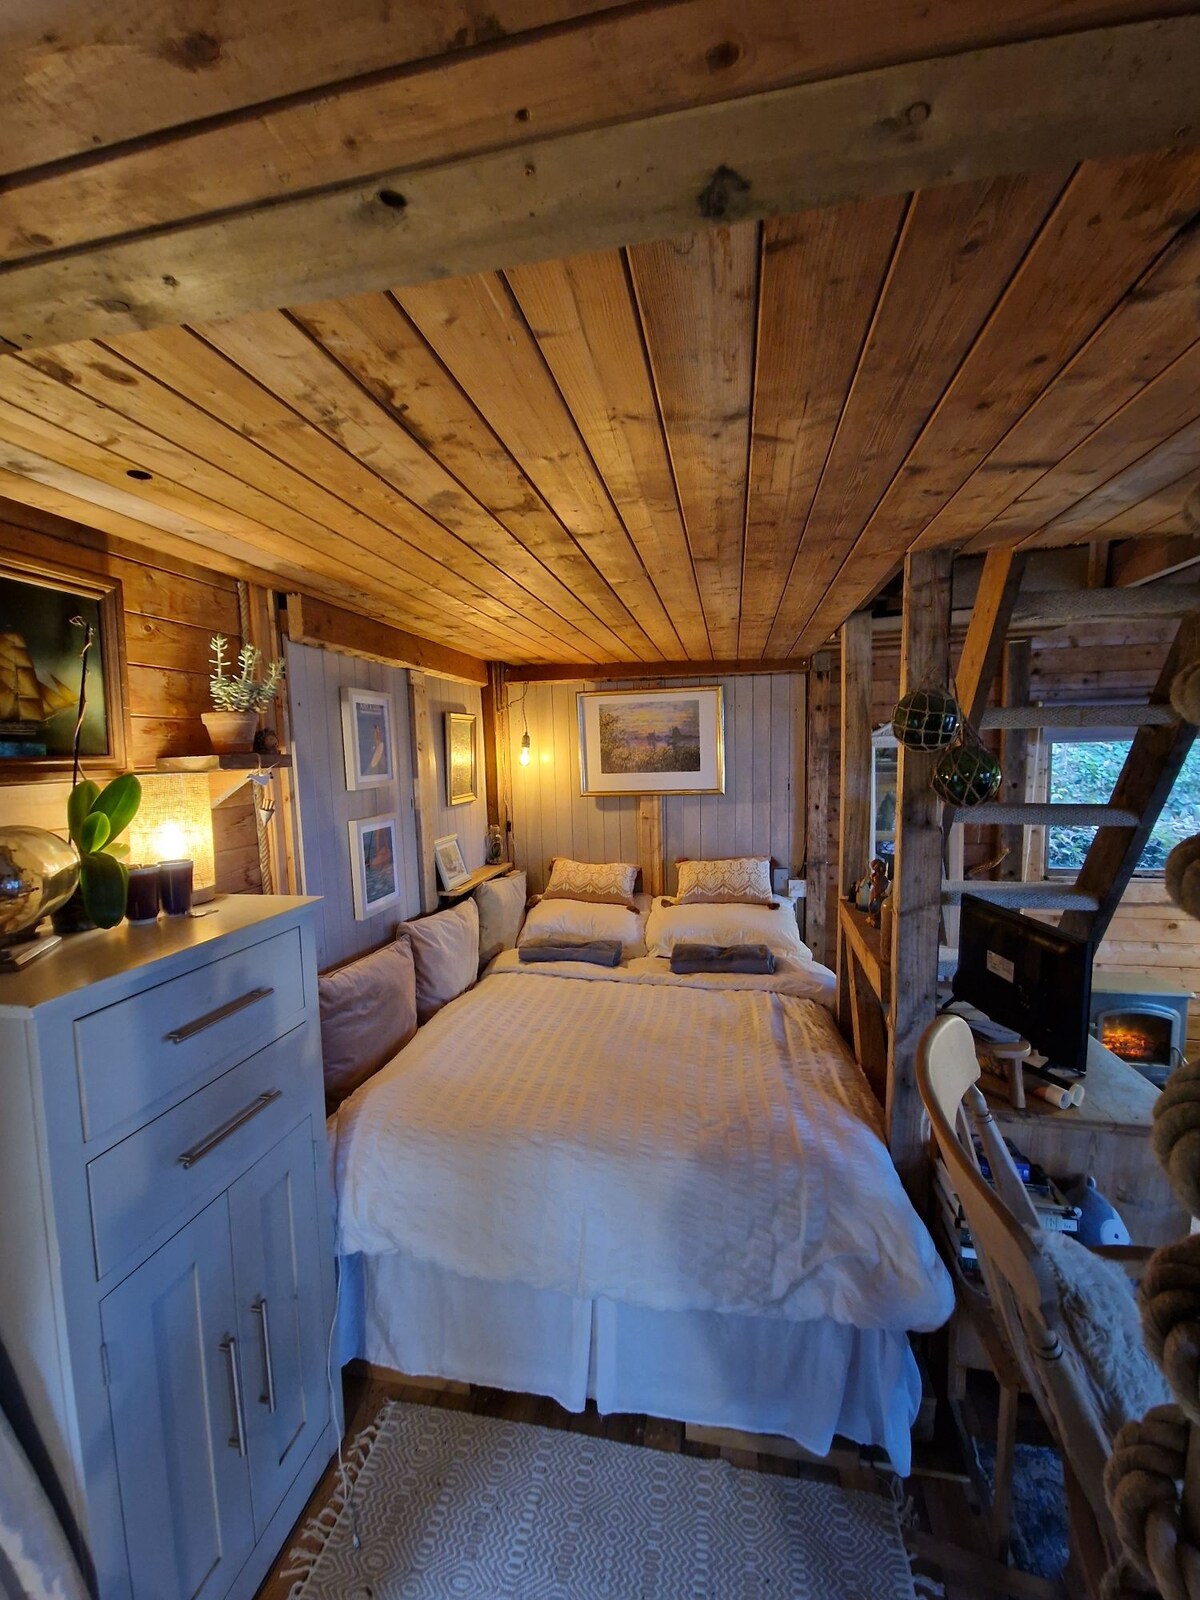 Crow 's Nest Glamping Cabin